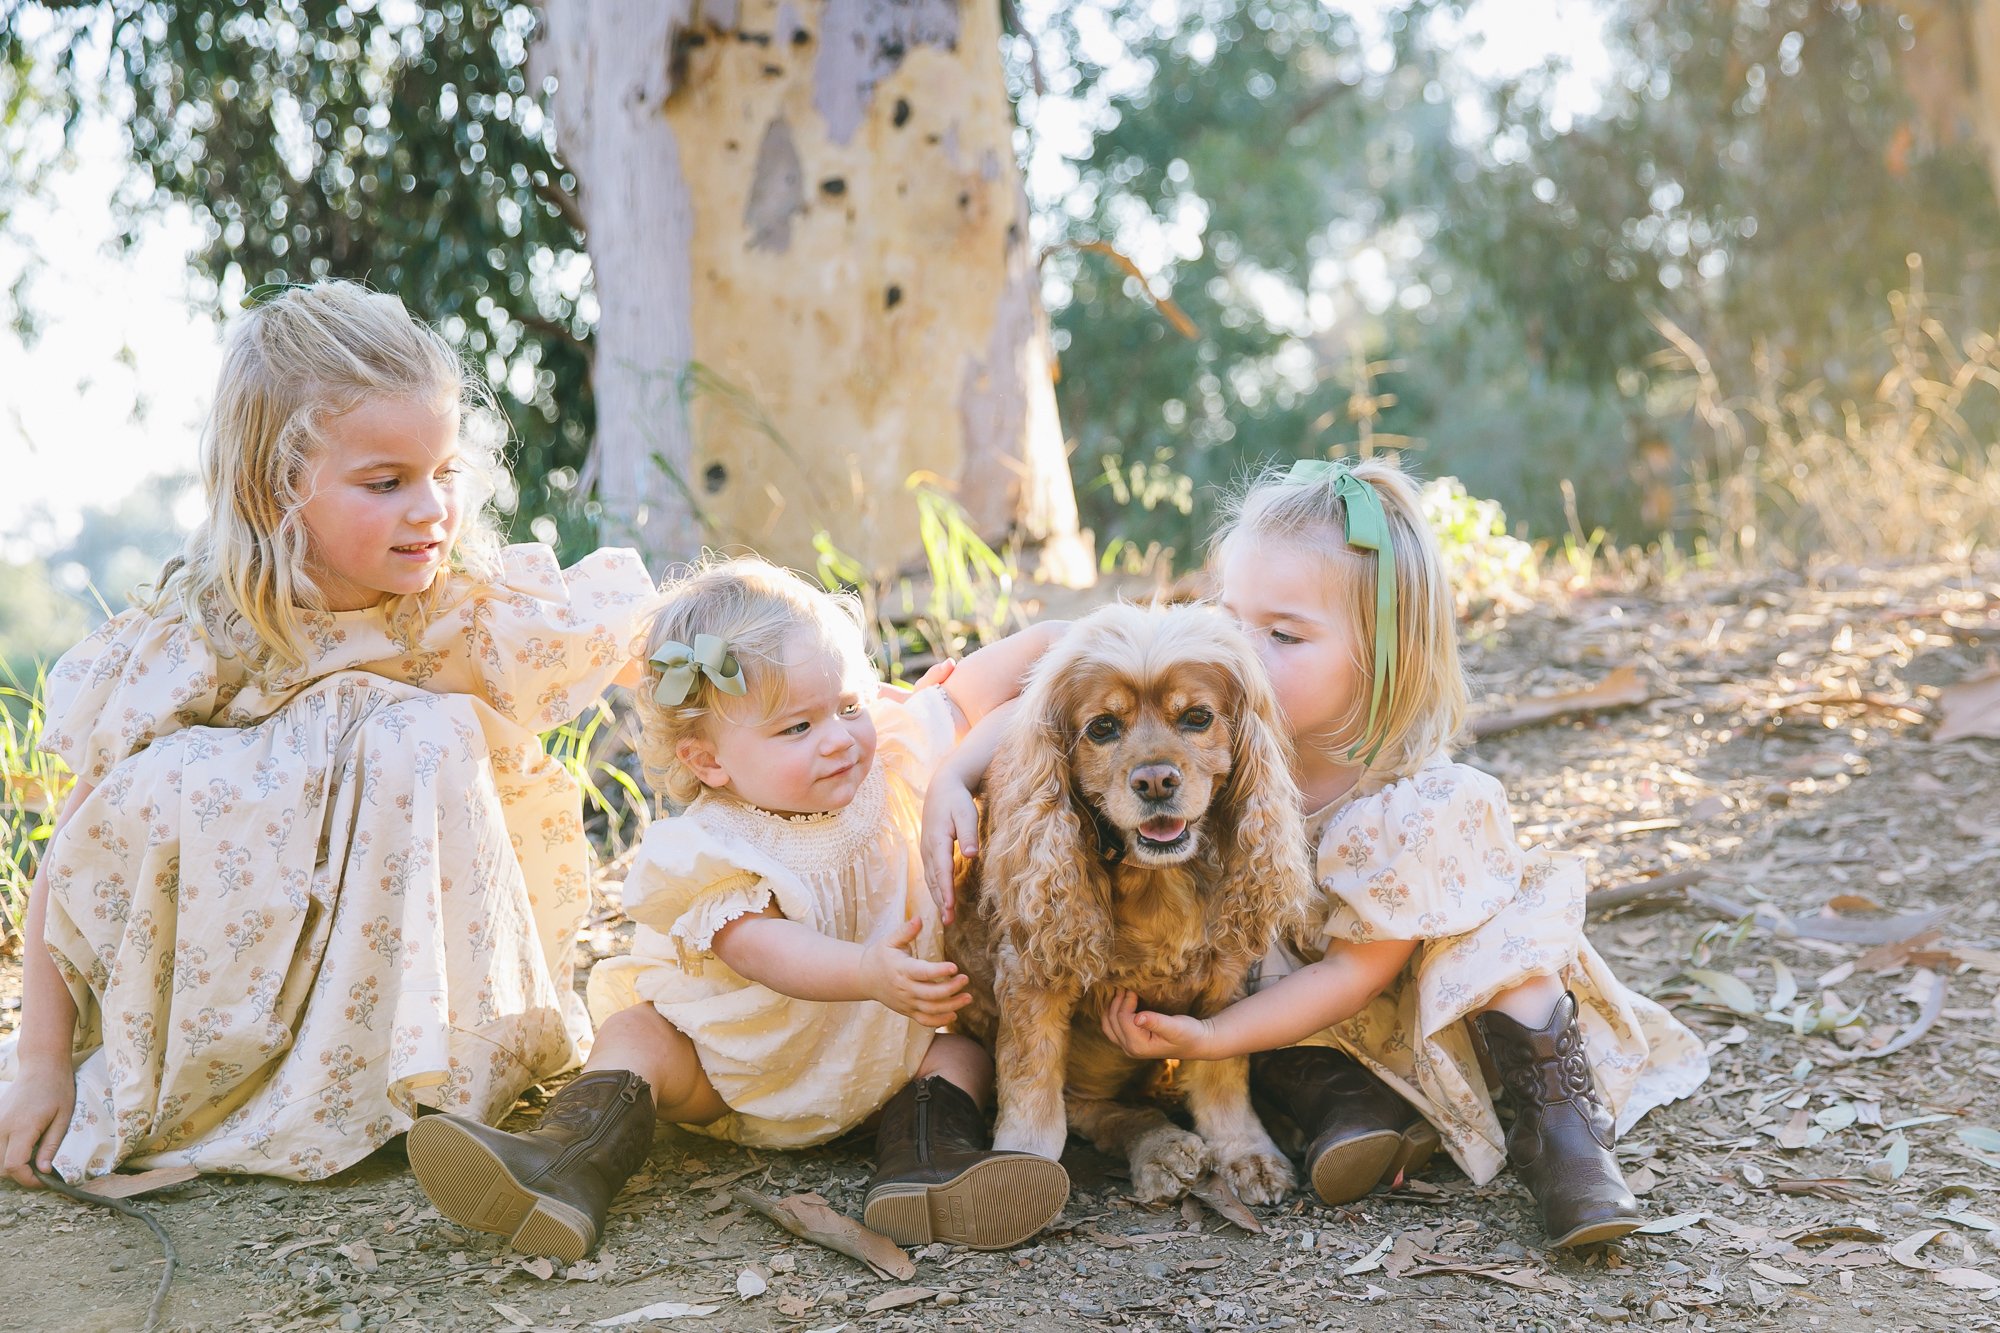 Los_Angeles_Family_Photographer_Golden_Hour_Mini_Session_Fall_Photos_Holiday_Card_Kids_Babies_Children_Luxury_Best_California_Photography-1003.jpg